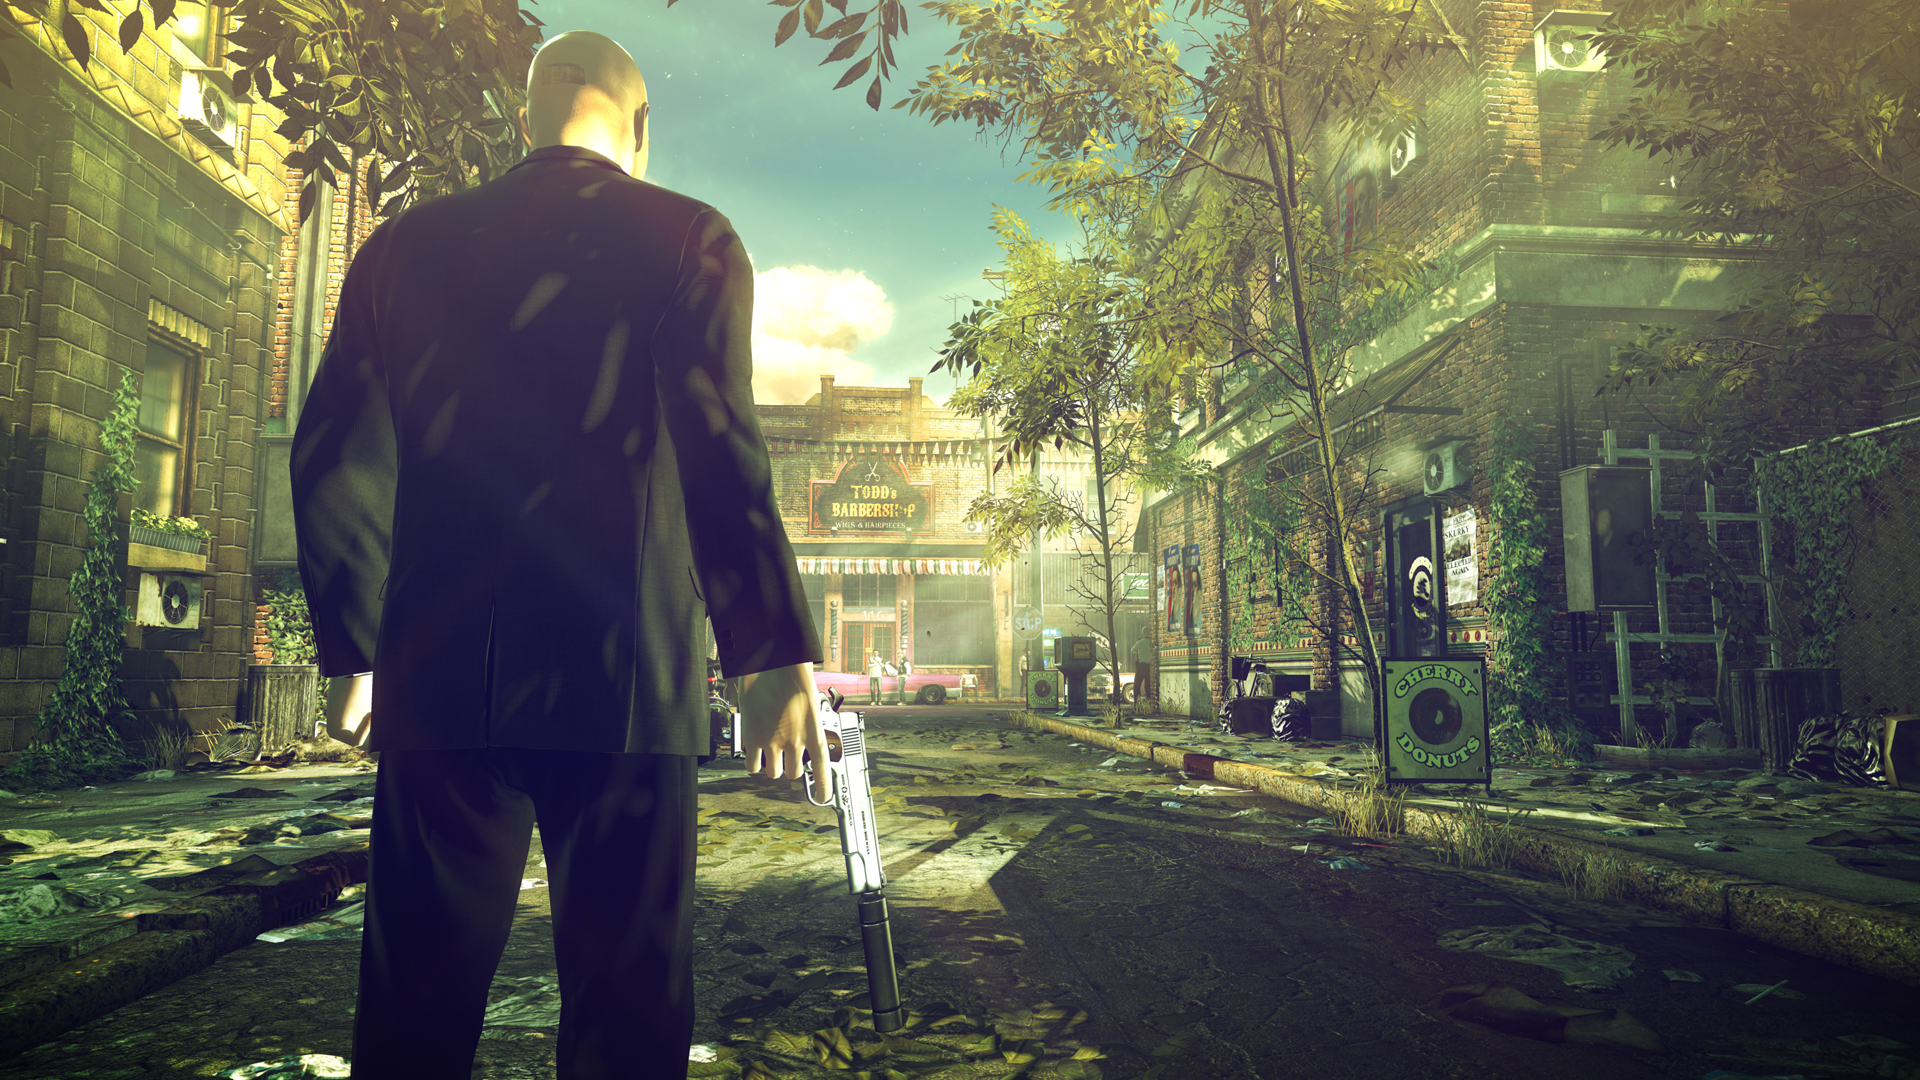 hitman absolution free download full version for pc